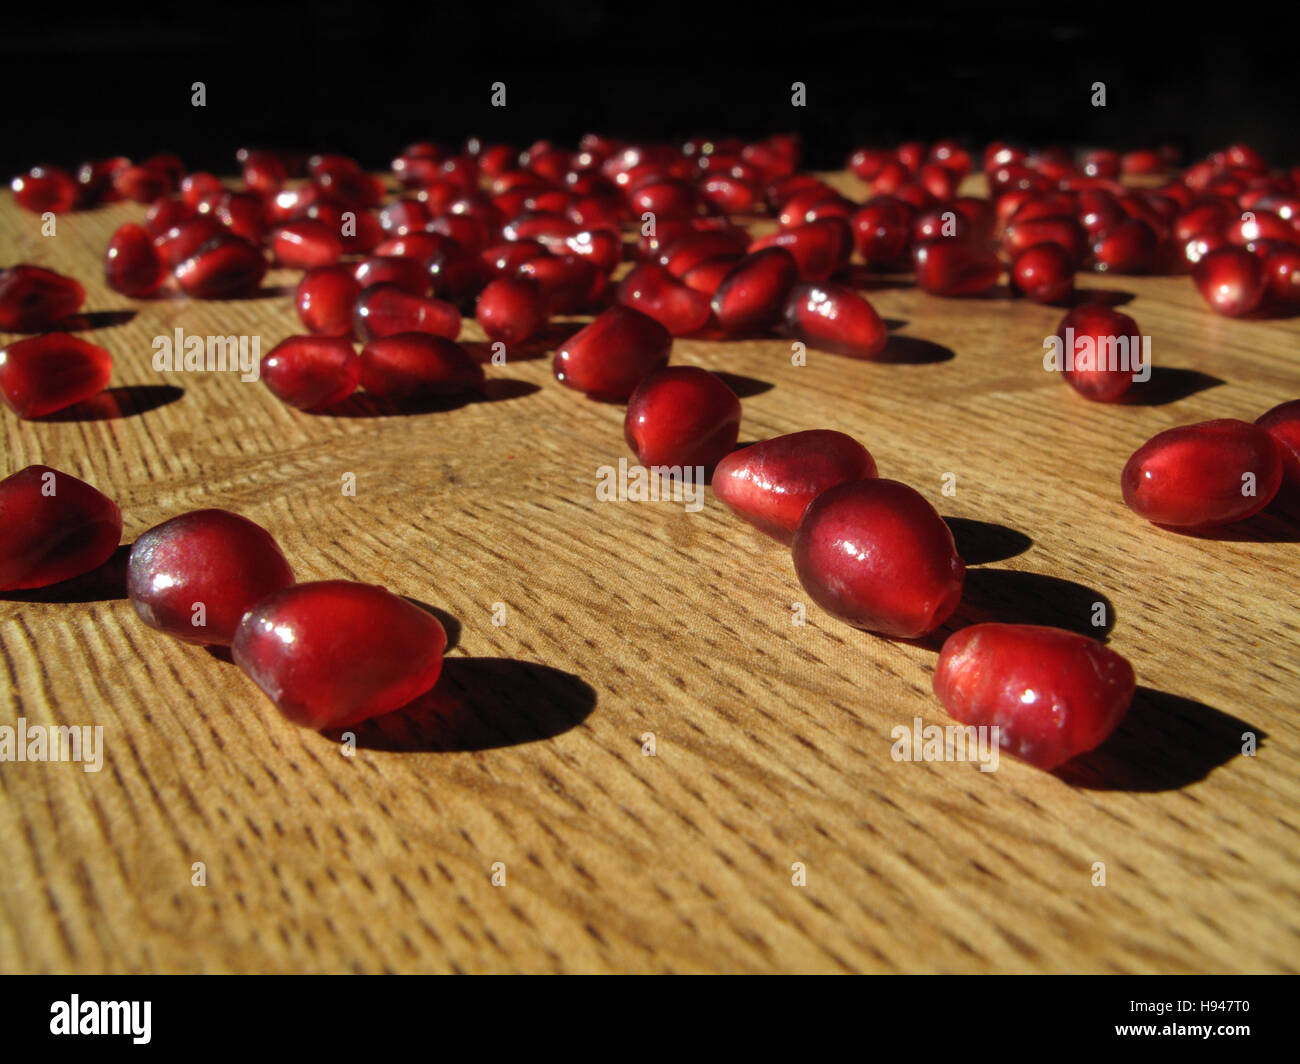 Pomegranate seeds on wood grained table Stock Photo